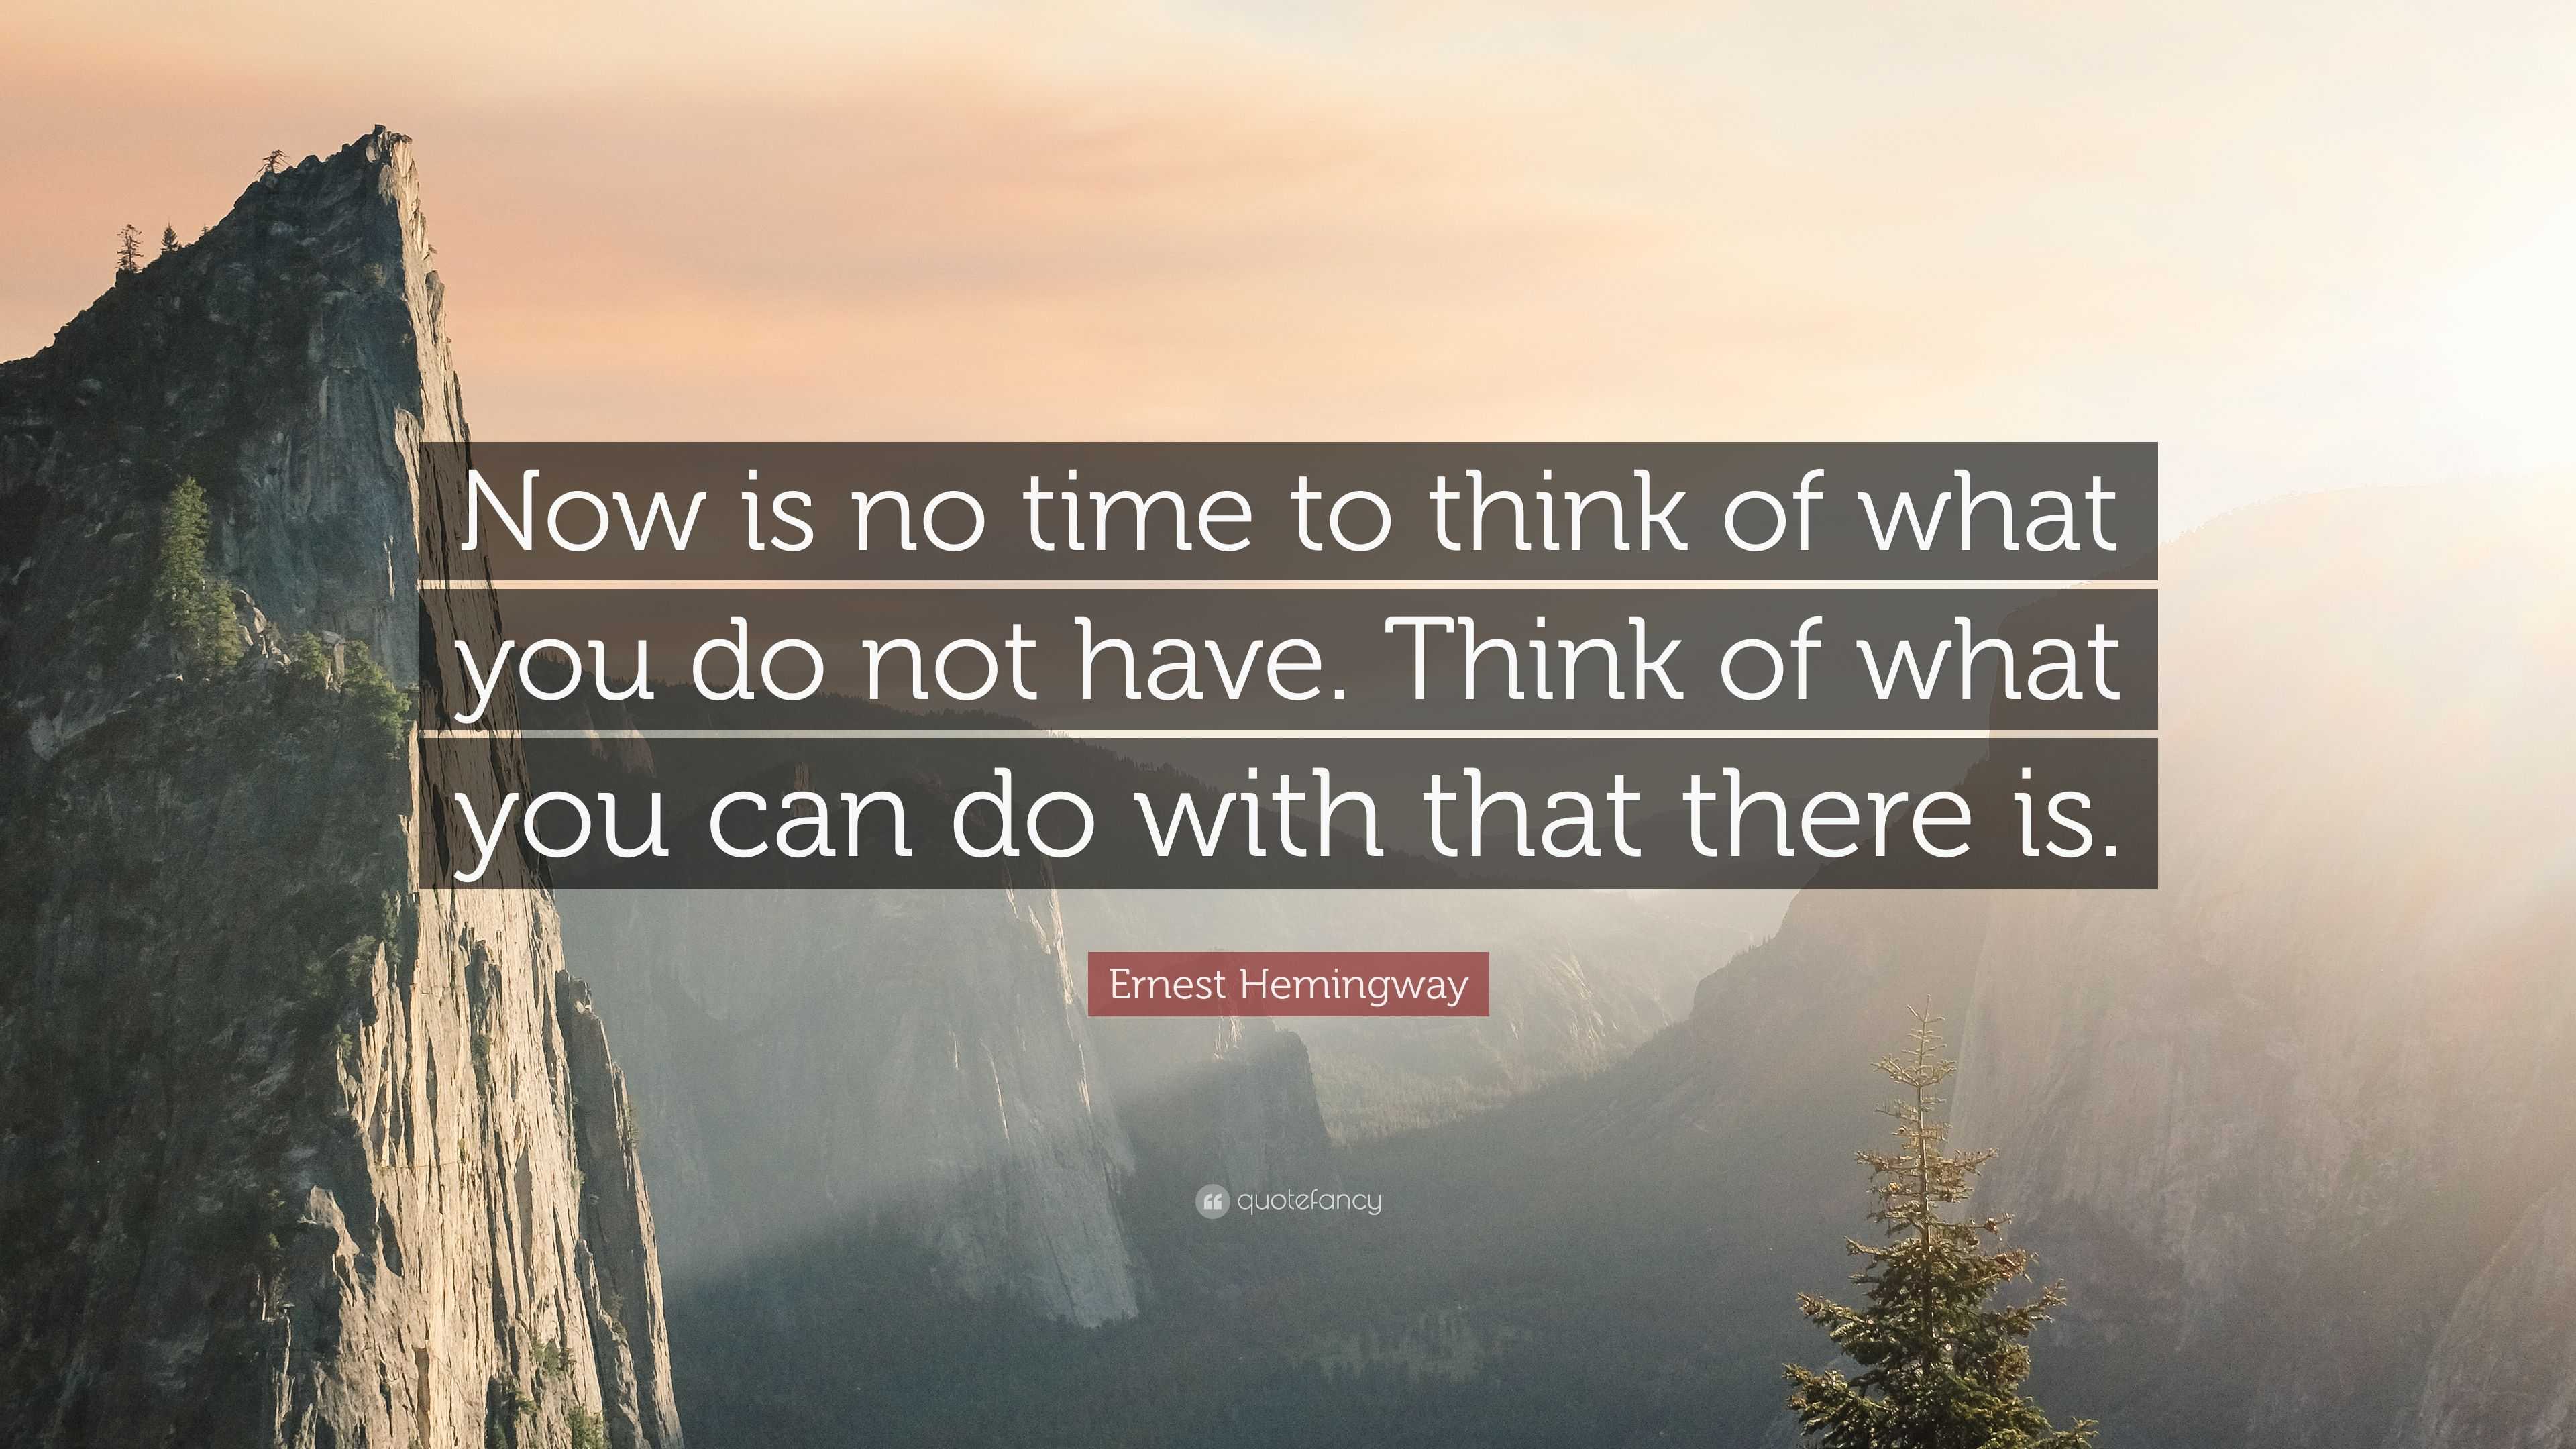 https://quotefancy.com/media/wallpaper/3840x2160/2043216-Ernest-Hemingway-Quote-Now-is-no-time-to-think-of-what-you-do-not.jpg